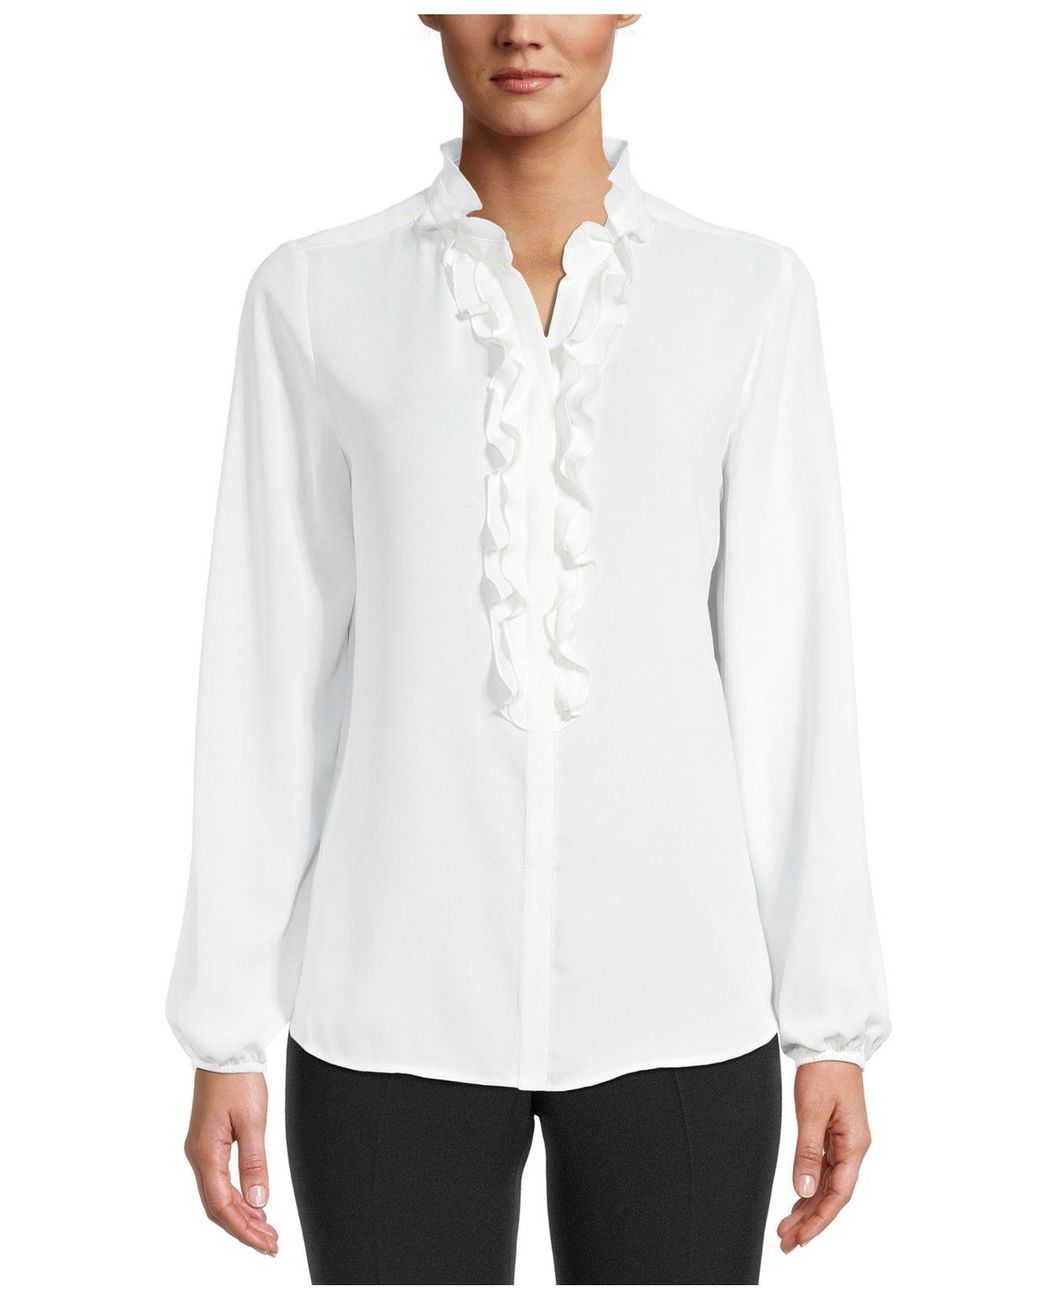 Bar Iii Synthetic Ruffled Blouse, Created For Macy's in White - Lyst